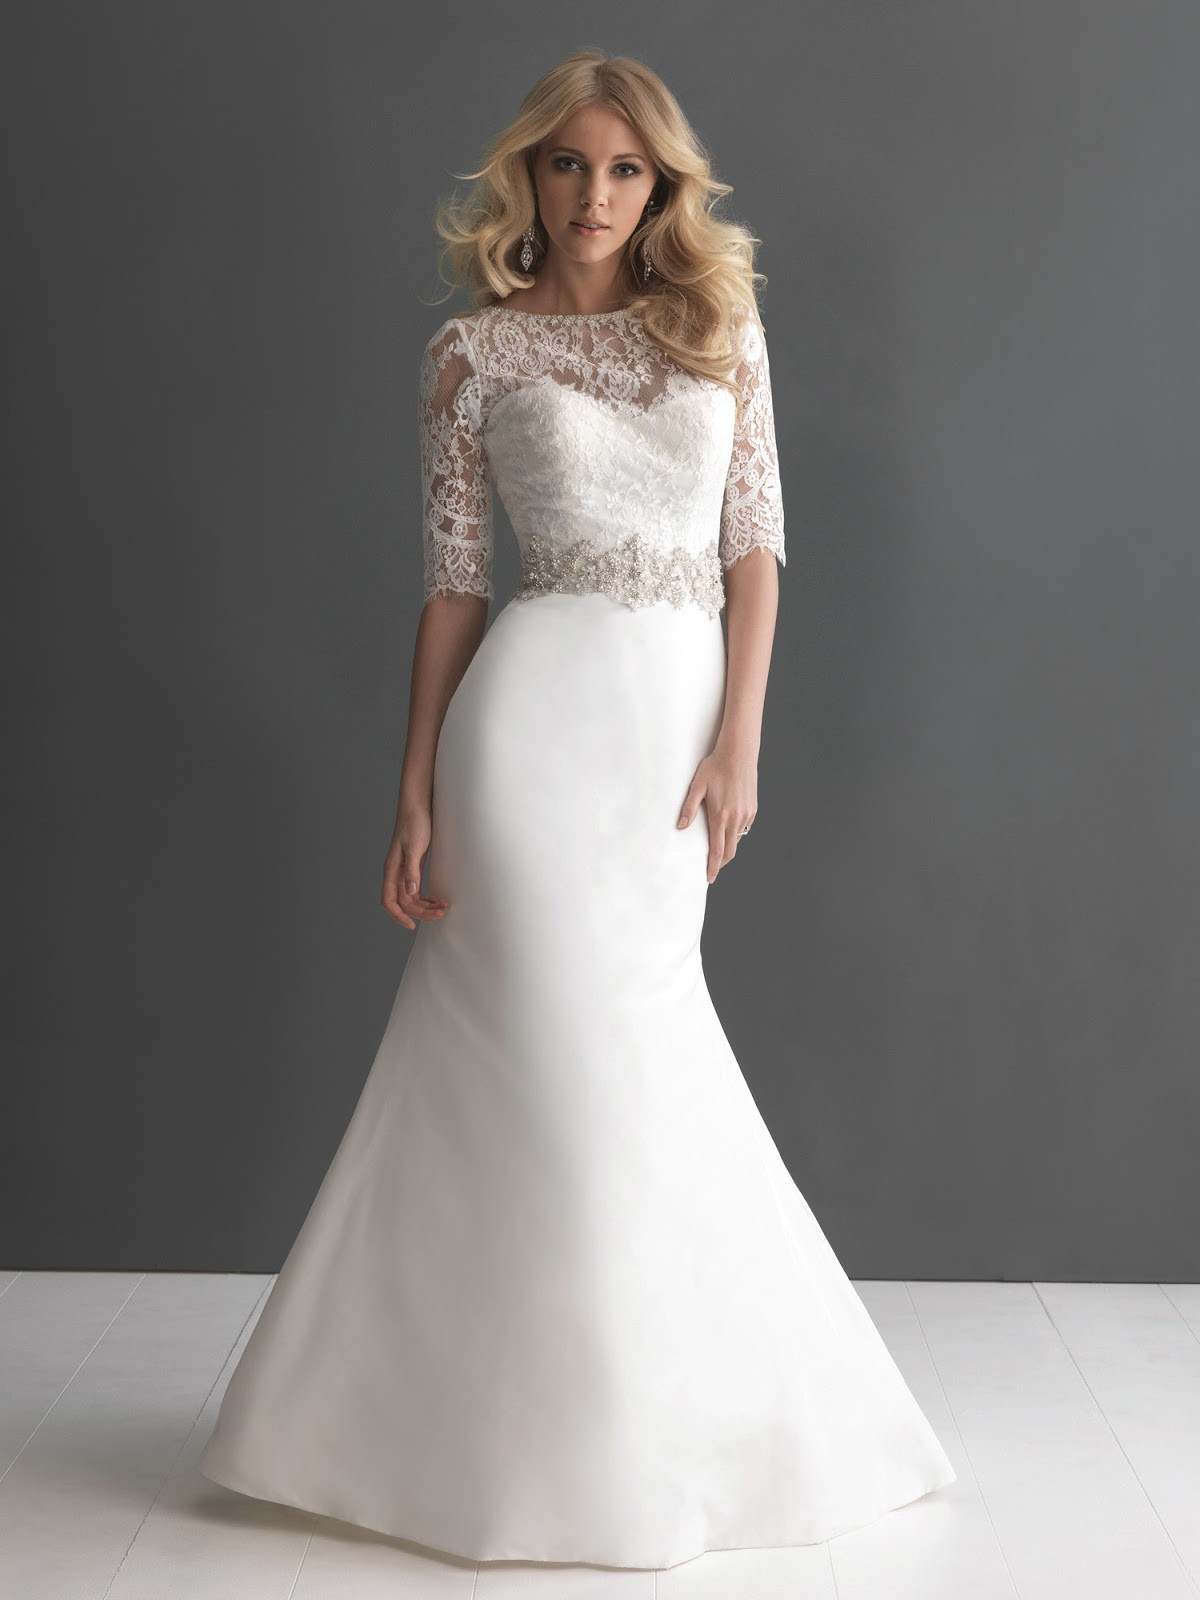 Lace Sleeve Wedding Dress
 DressyBridal Allure Wedding Dresses Fall 2013 Collection